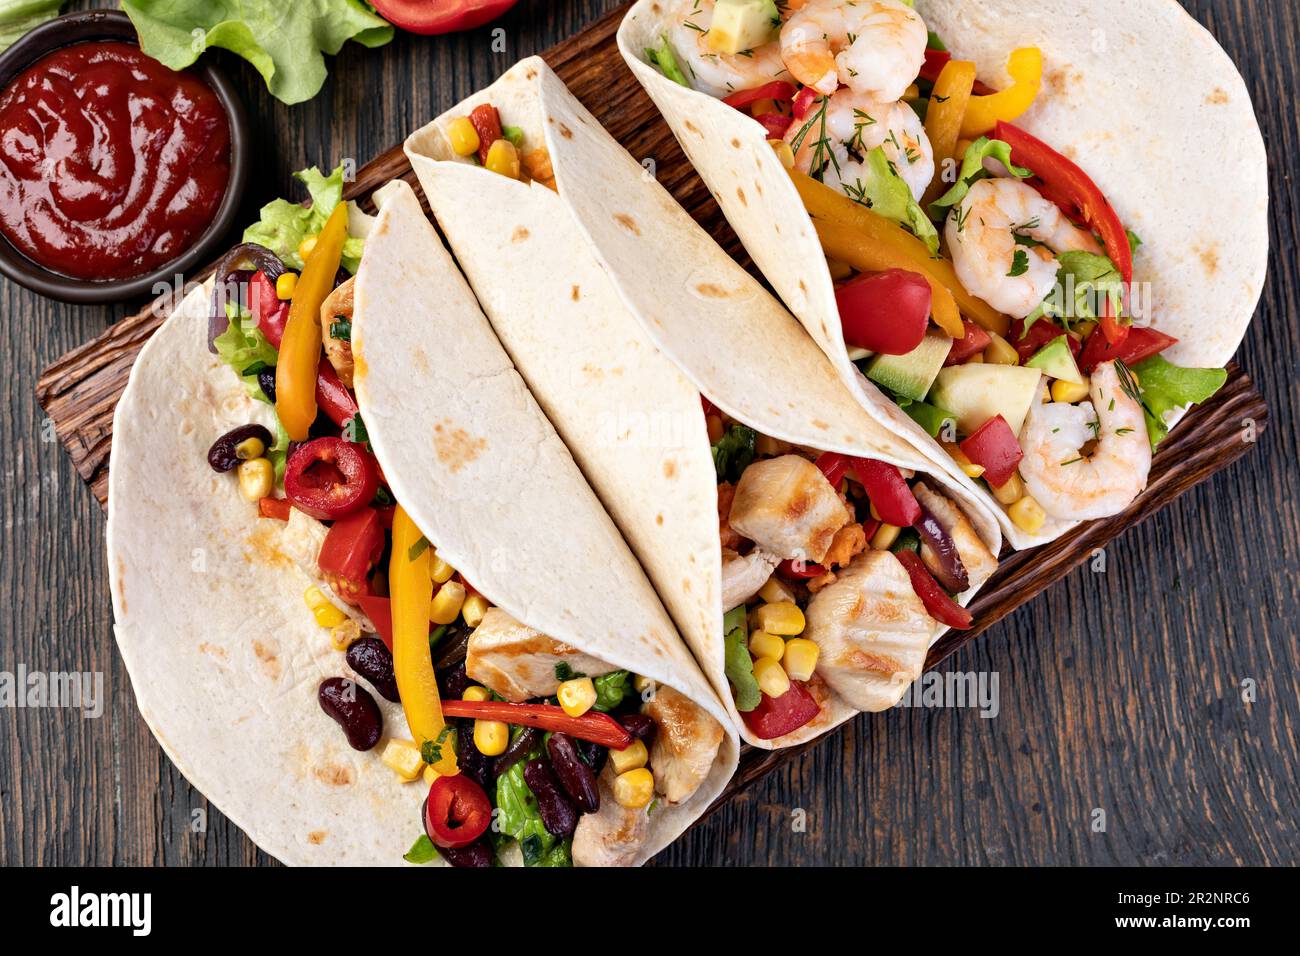 burrito with vegetables and tortilla on a wooden table Stock Photo